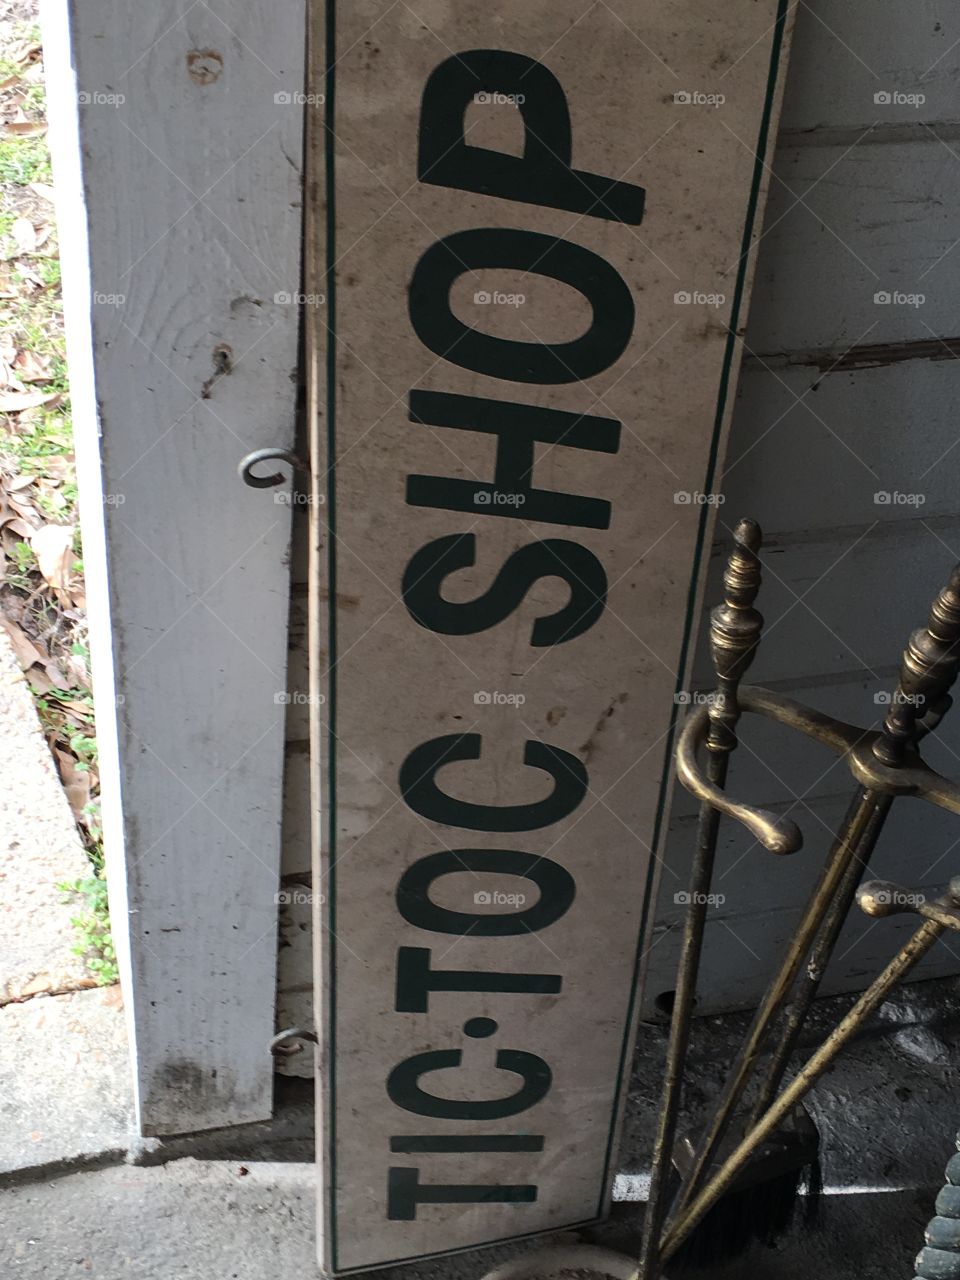 My grandmother old shop sign